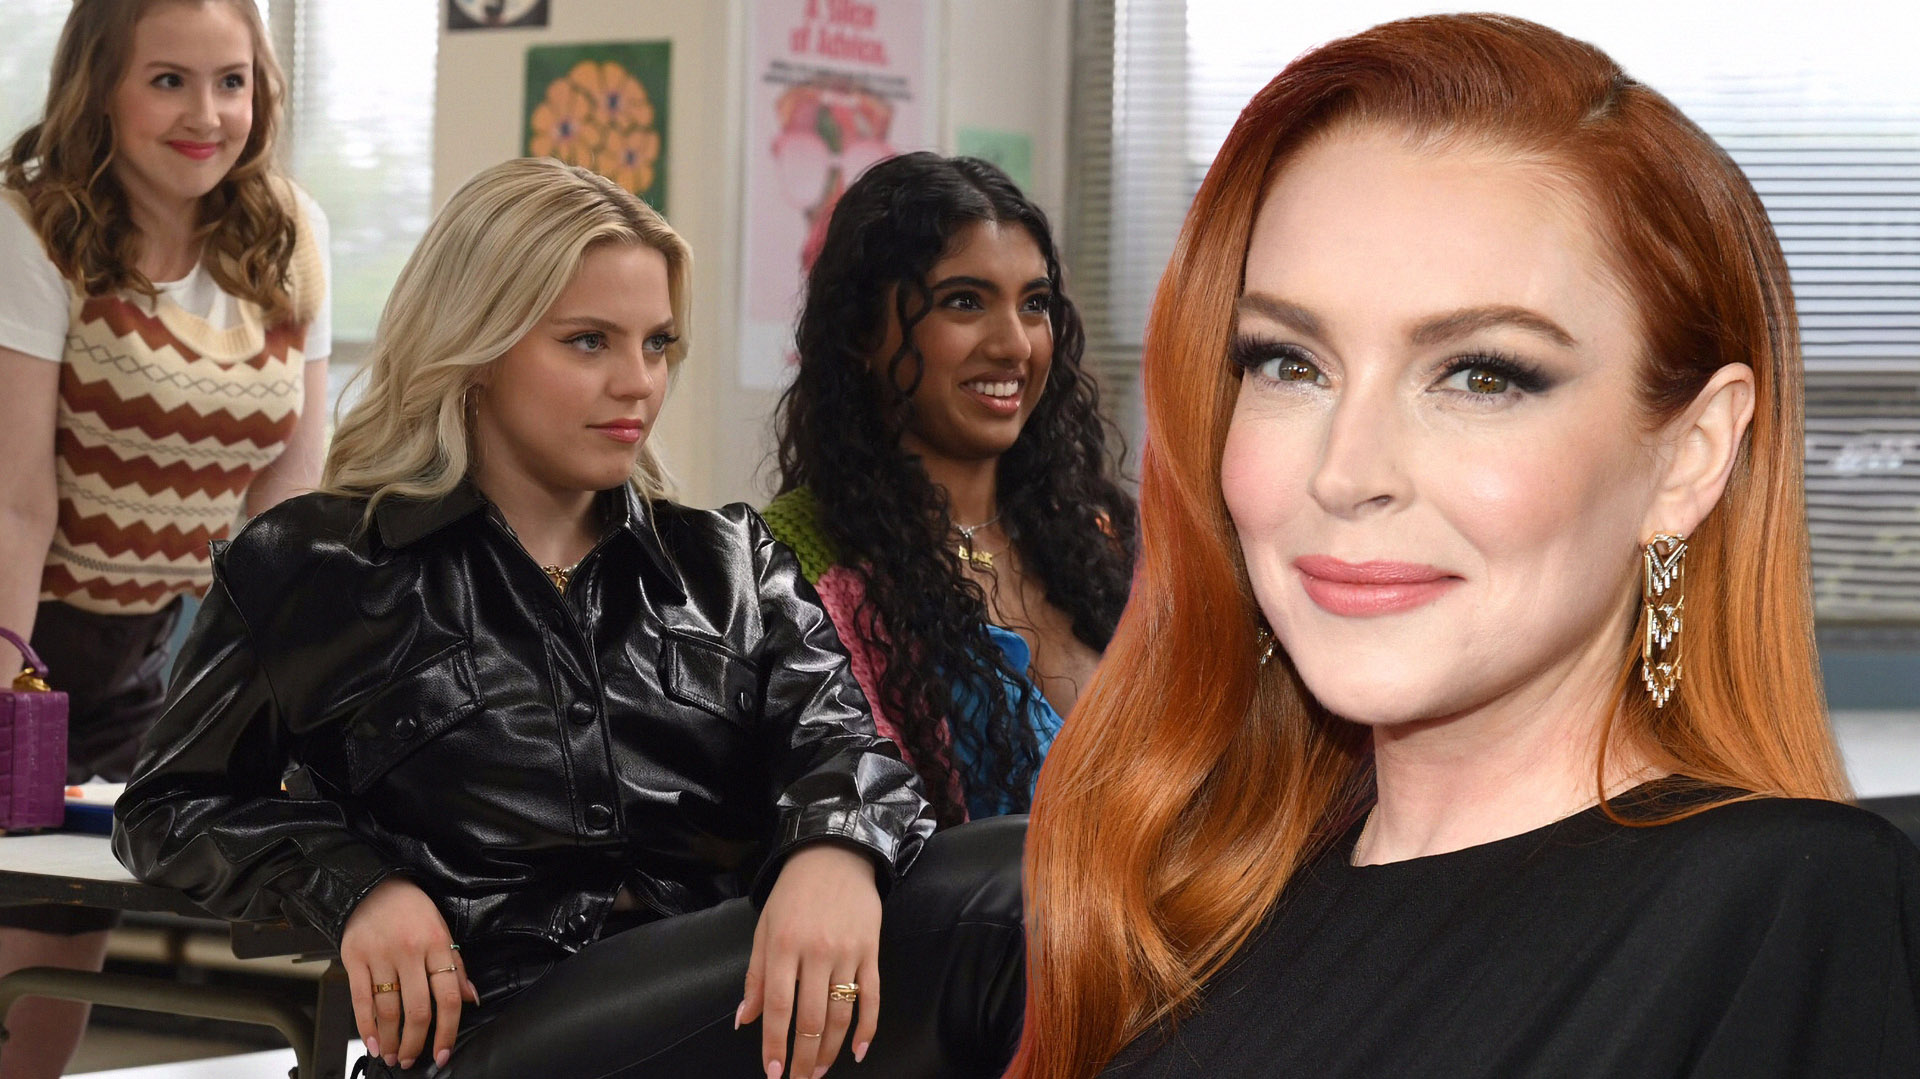 What Is Lindsay Lohan Up to After Her Brief Mean Girls Cameo?